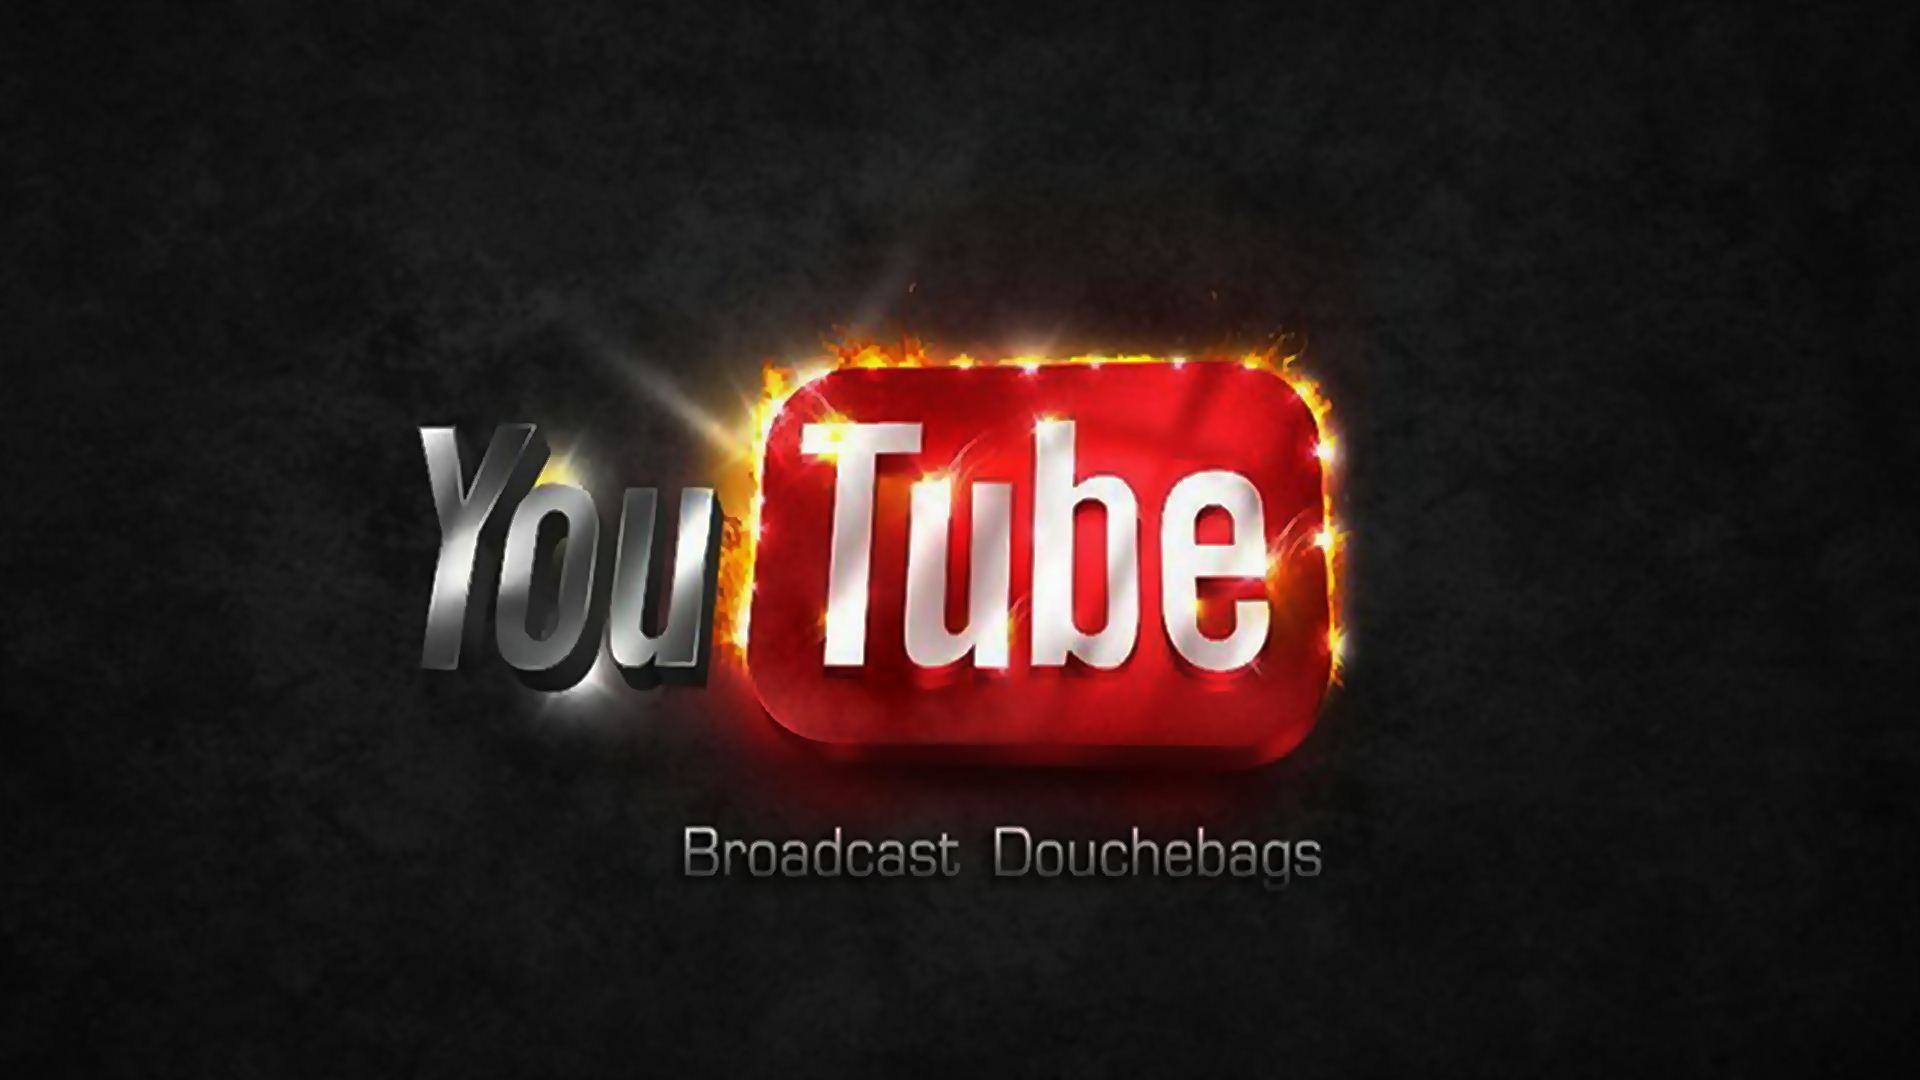 youtube 1080p free download